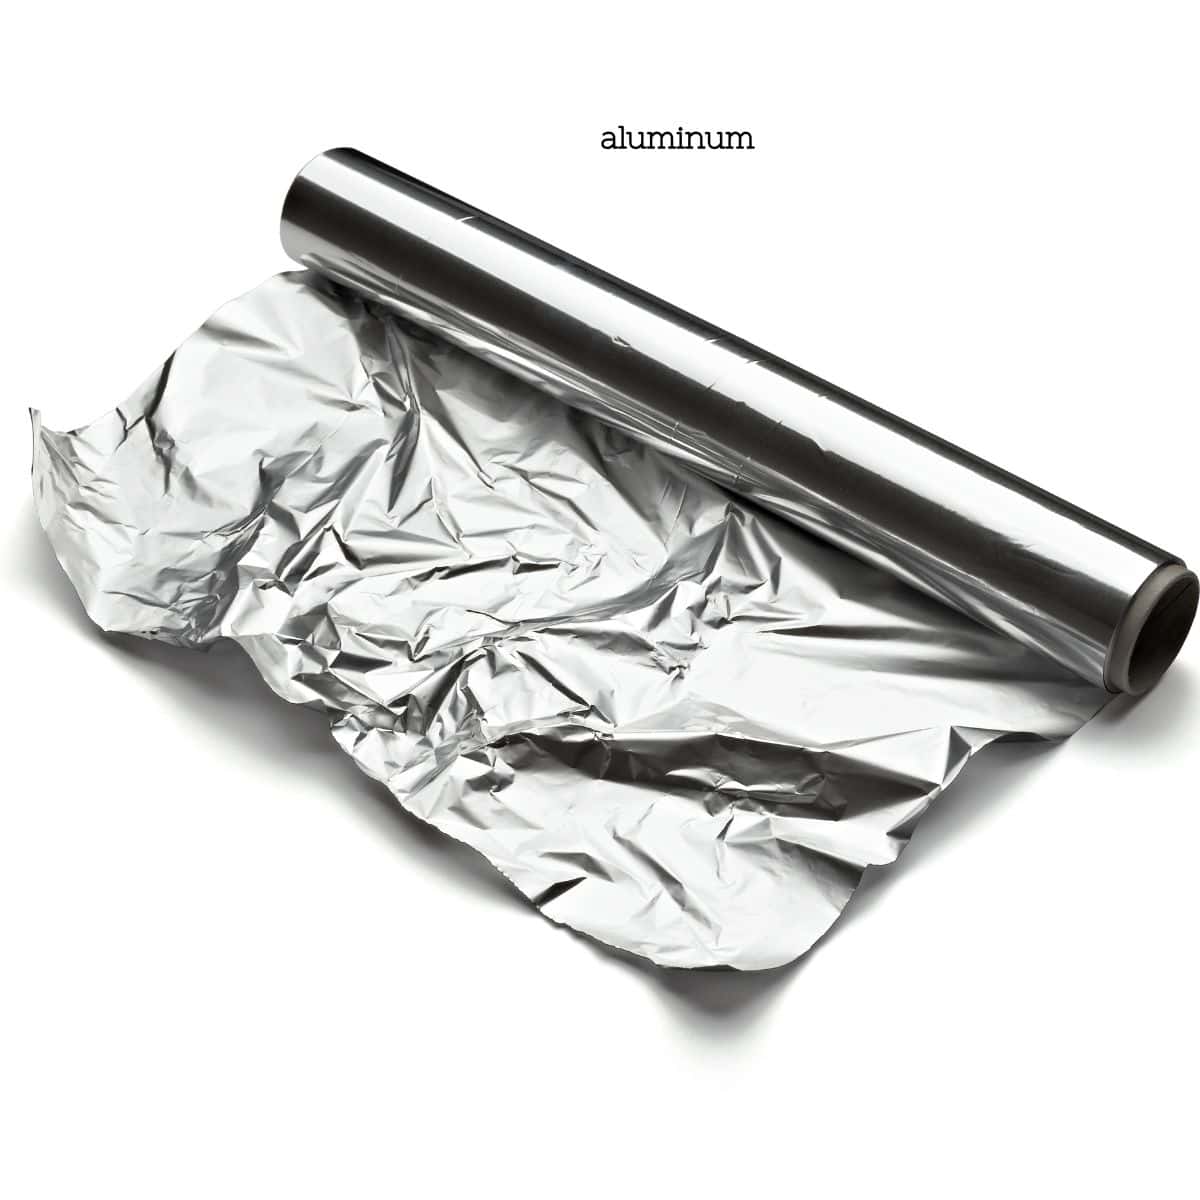 A roll of aluminum foil partially unrolled, representing materials to avoid when cooking due to potential health risks.